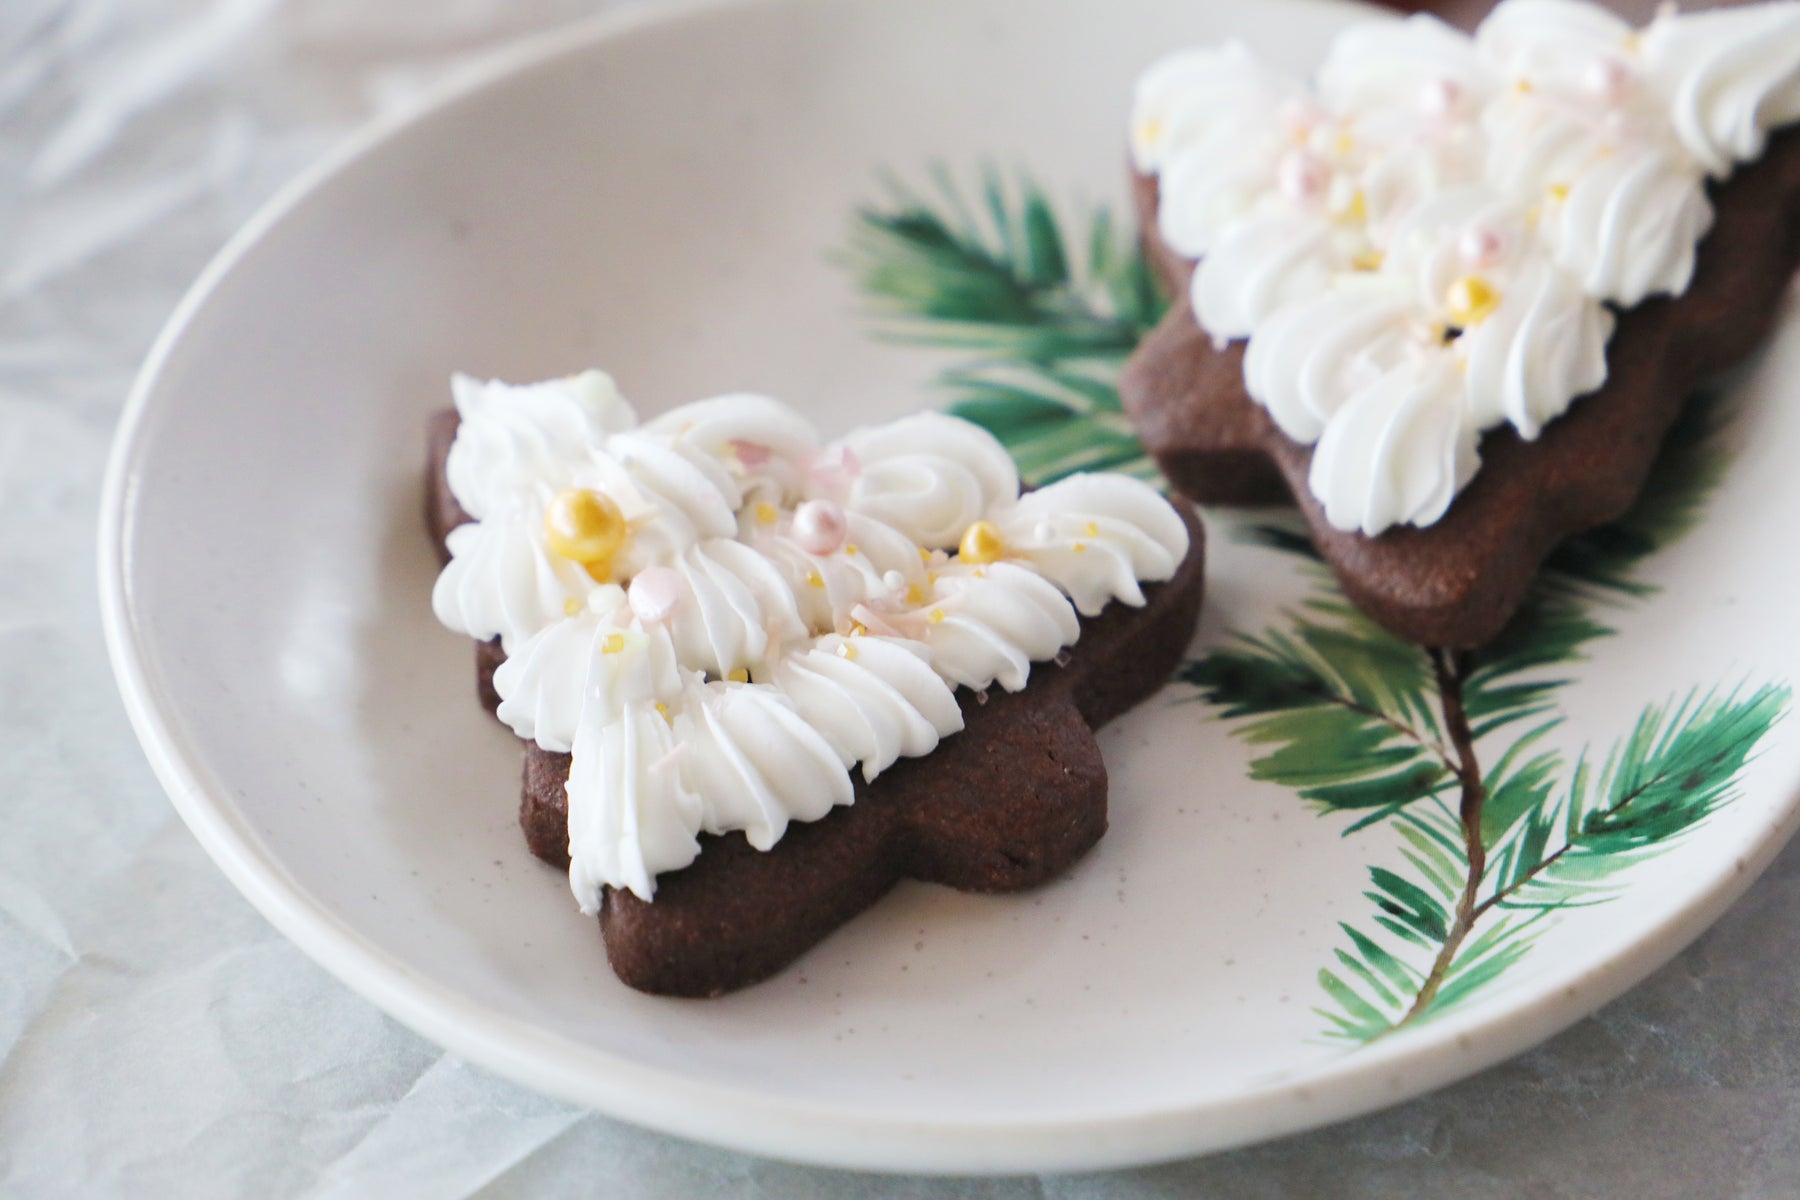 Hot Chocolate Cut-out Cookies